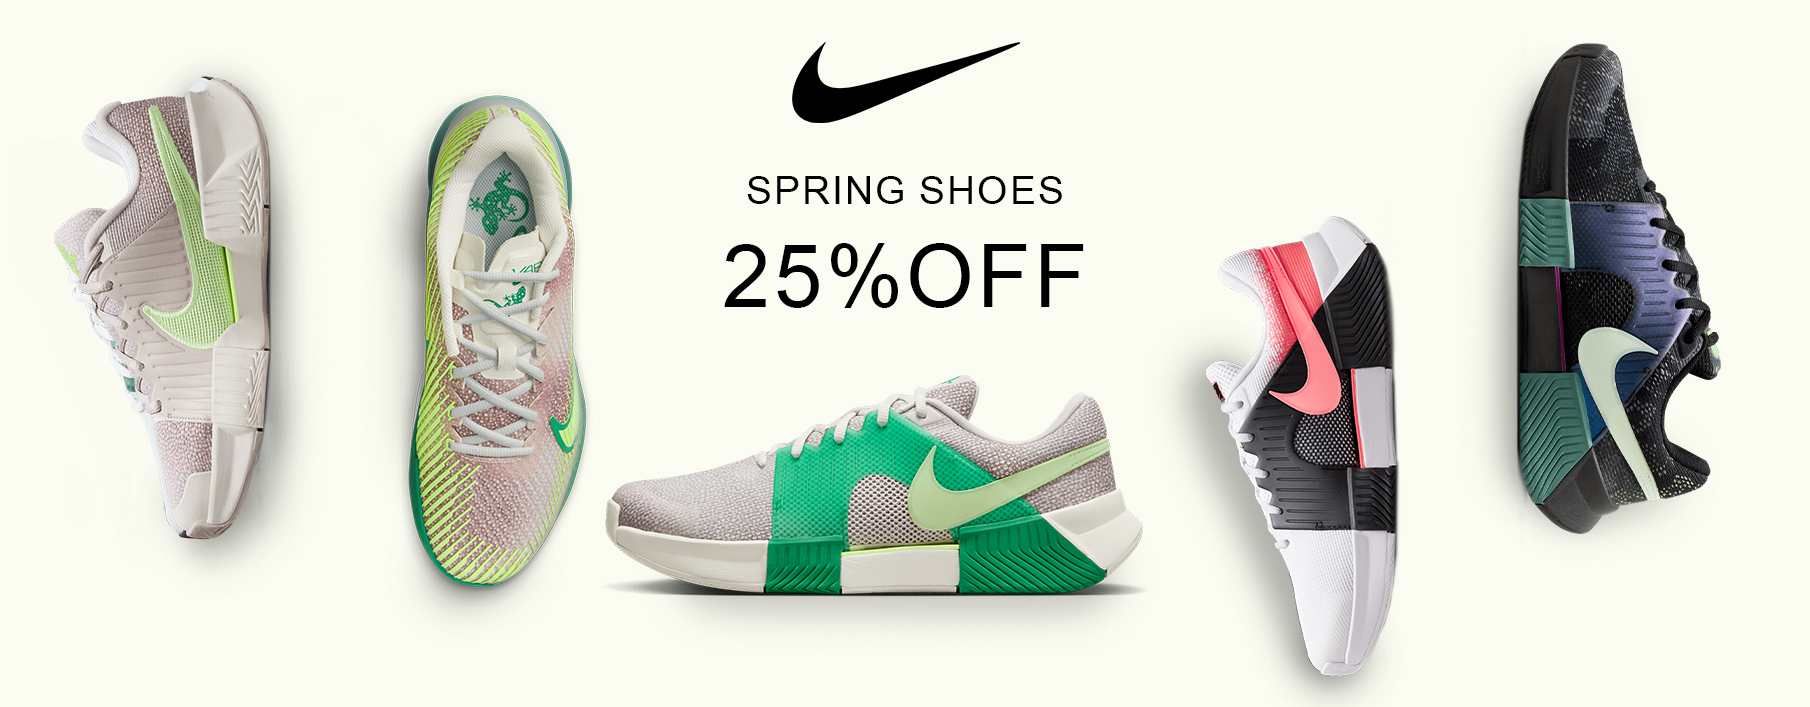 tennis Nike spring sale shoes